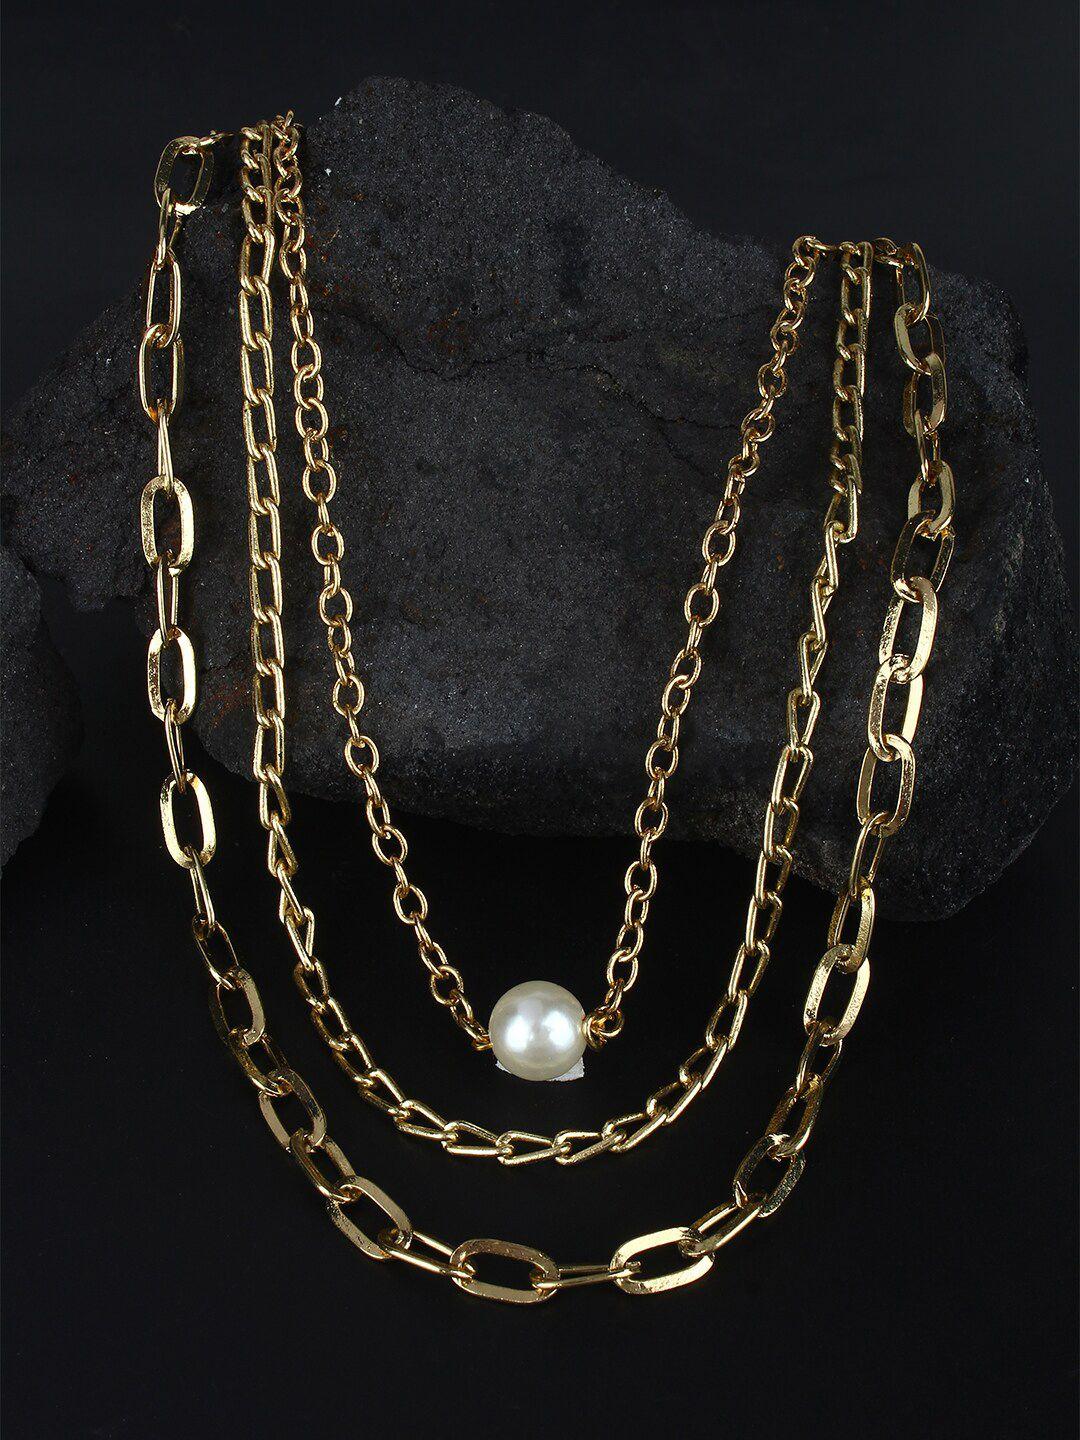 stylecast x kpop gold-toned & white brass gold-plated handcrafted necklace